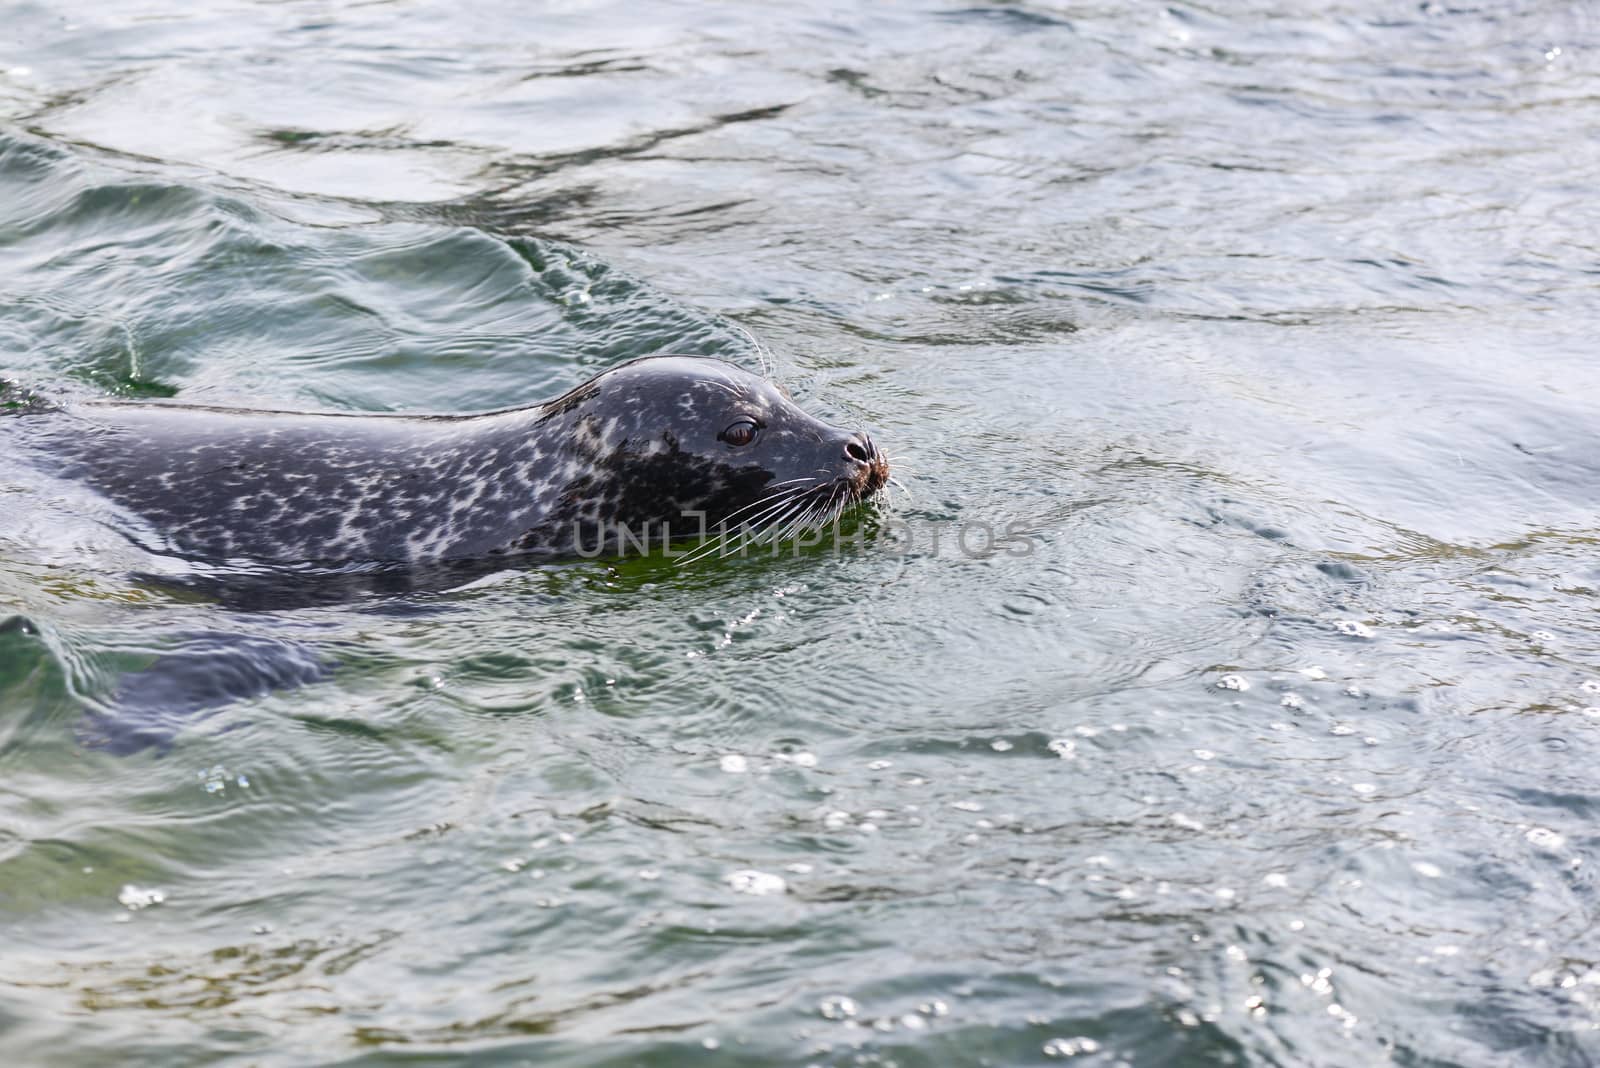 Harbor seal, Phoca vitulina, common seal swimming in water with head above the water level